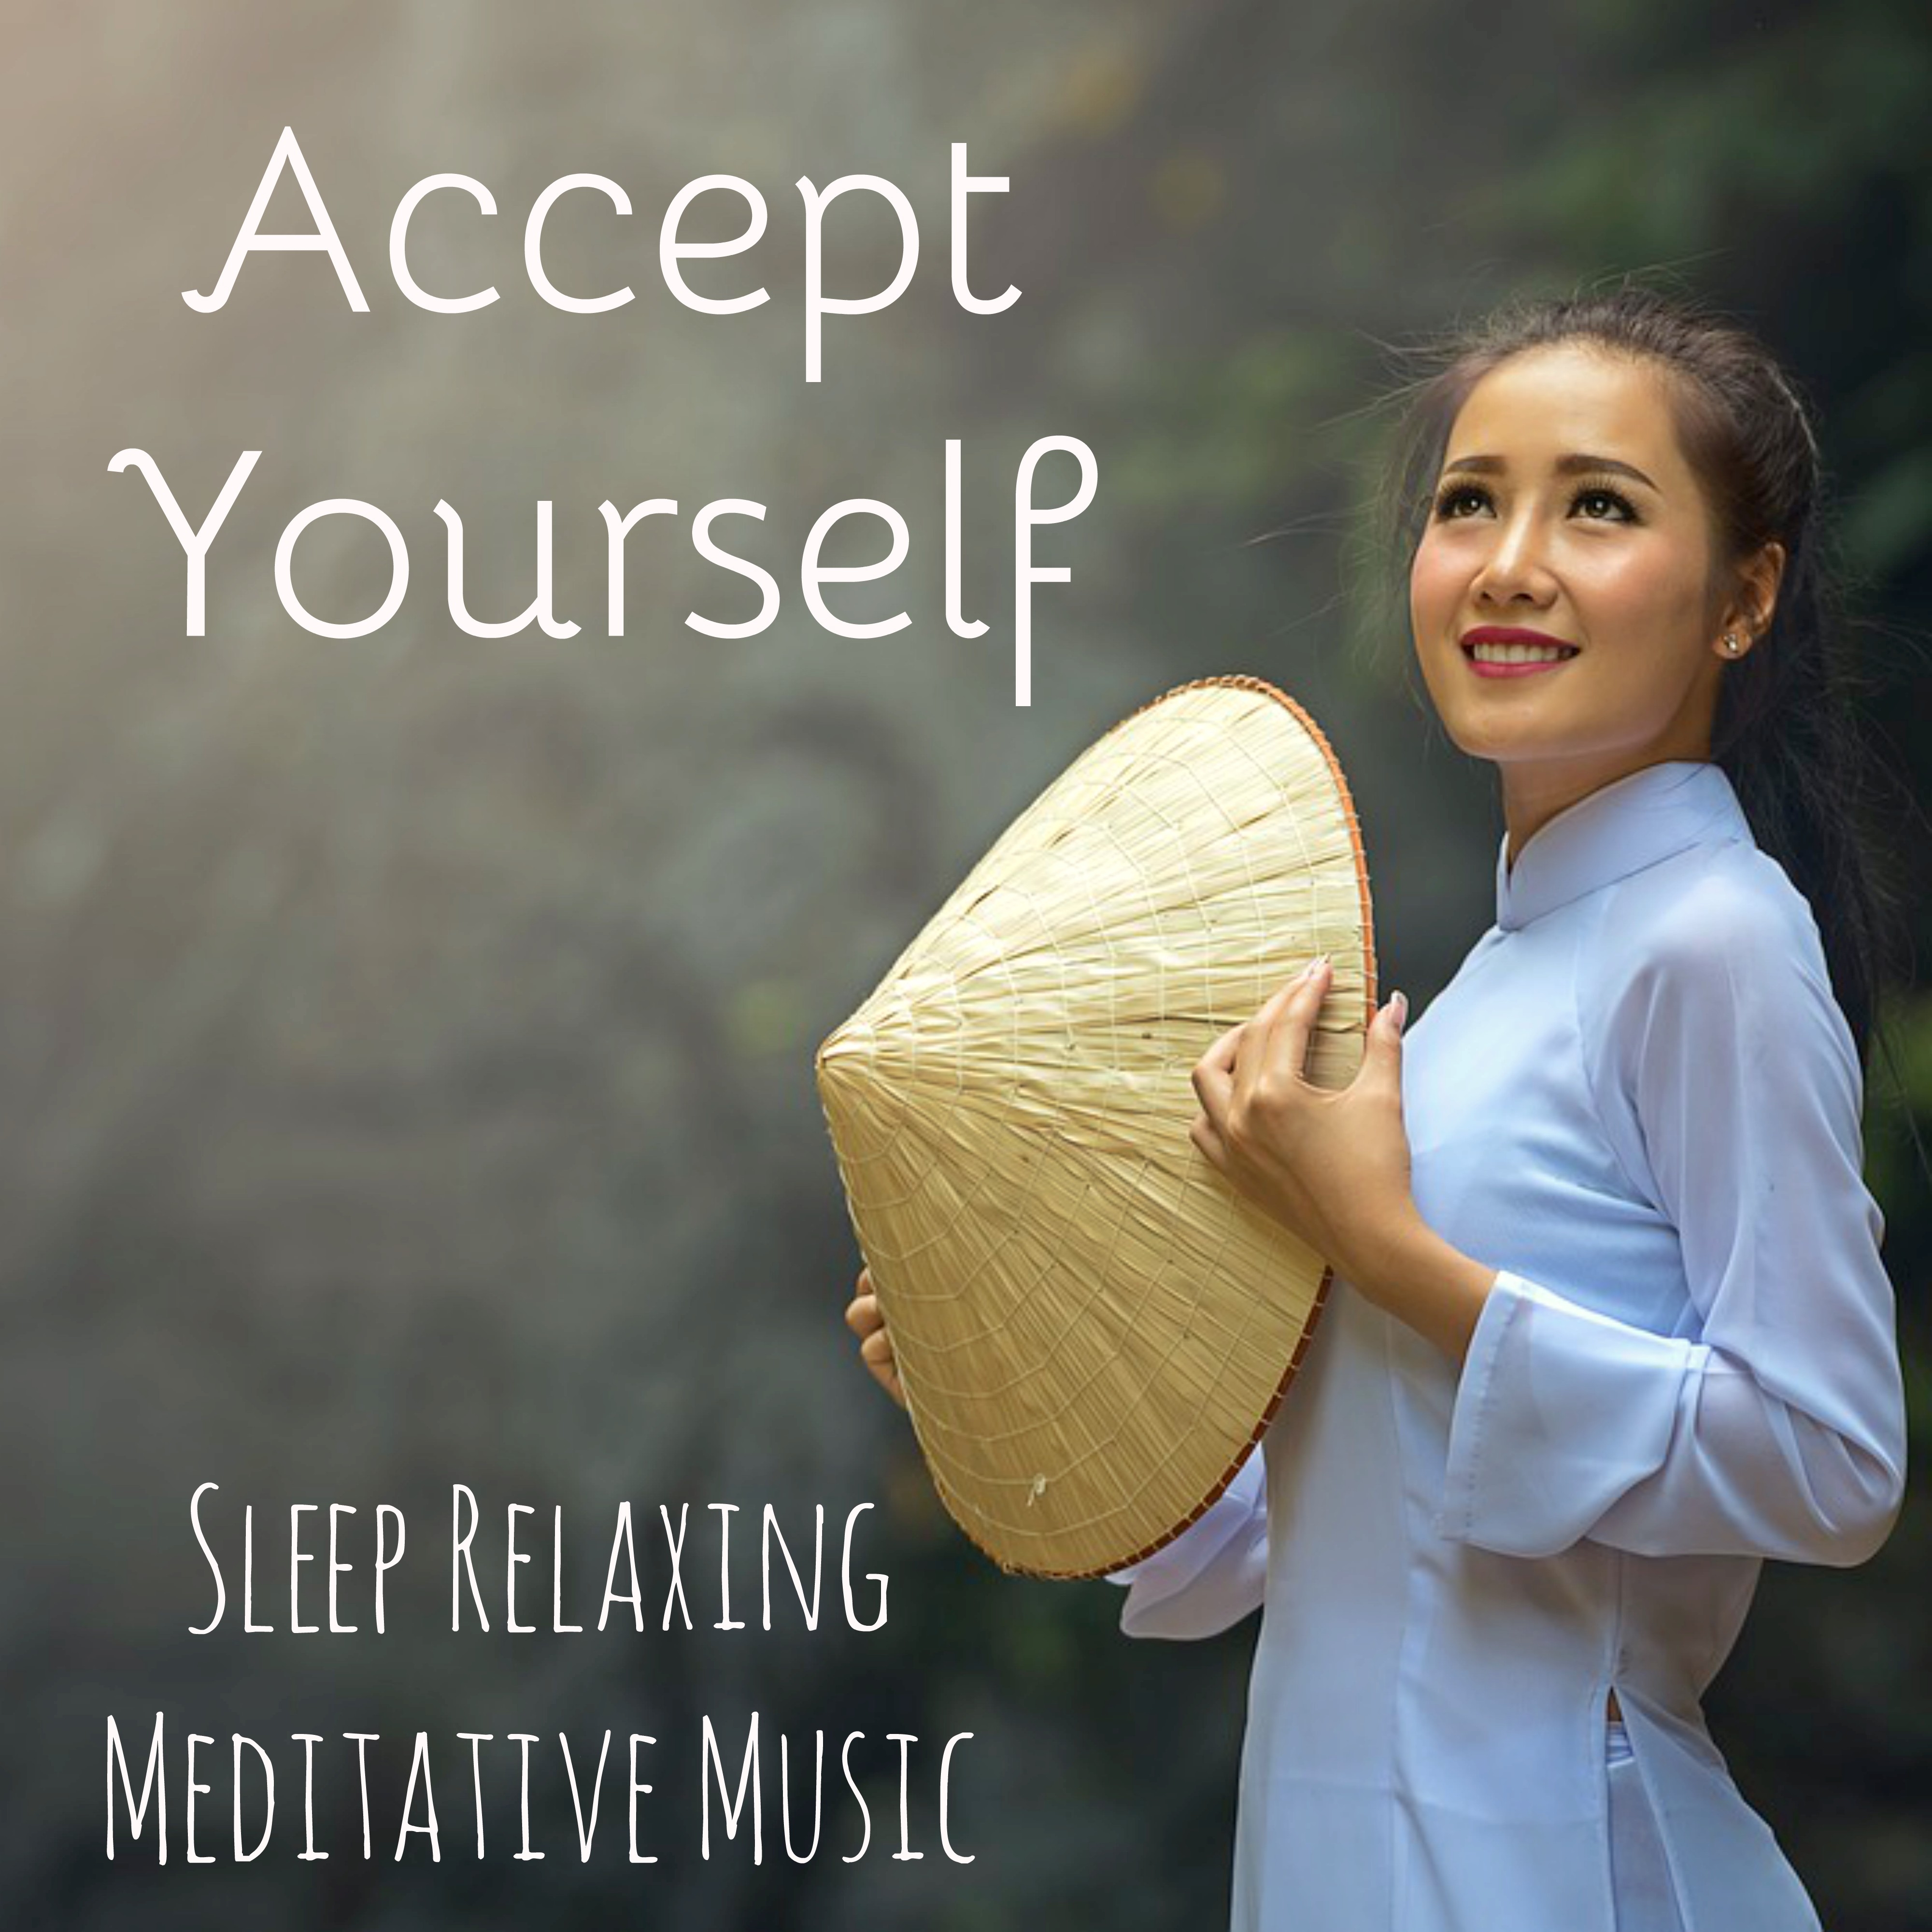 Accept Yourself - Sleep Relaxing Meditative Music for Healing Break Inner Wellness More Awareness with Instrumental Nature New Age Sounds